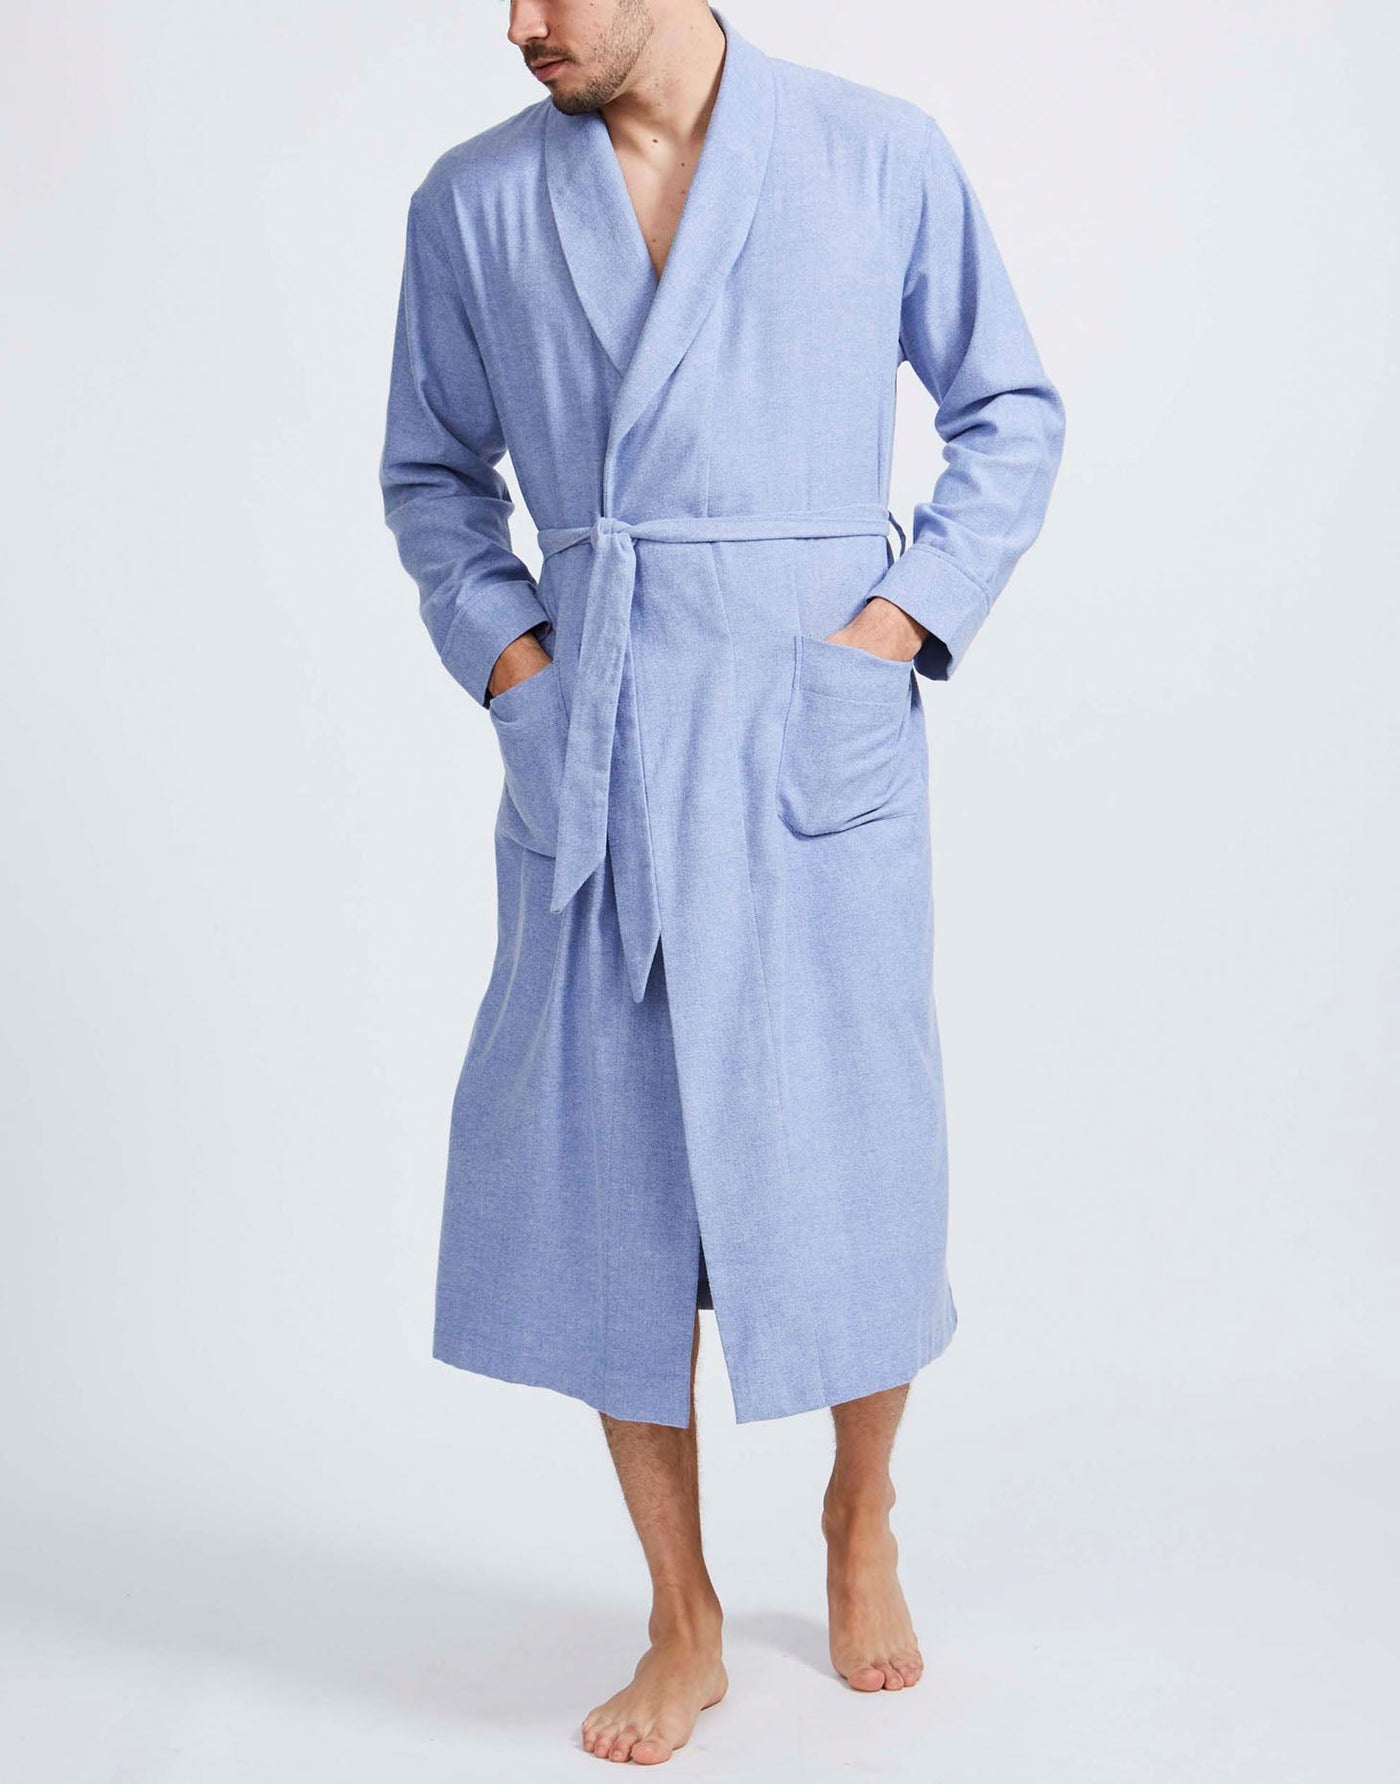 Men's Brushed Cotton Dressing Gown – Staffordshire Blue Herringboneo